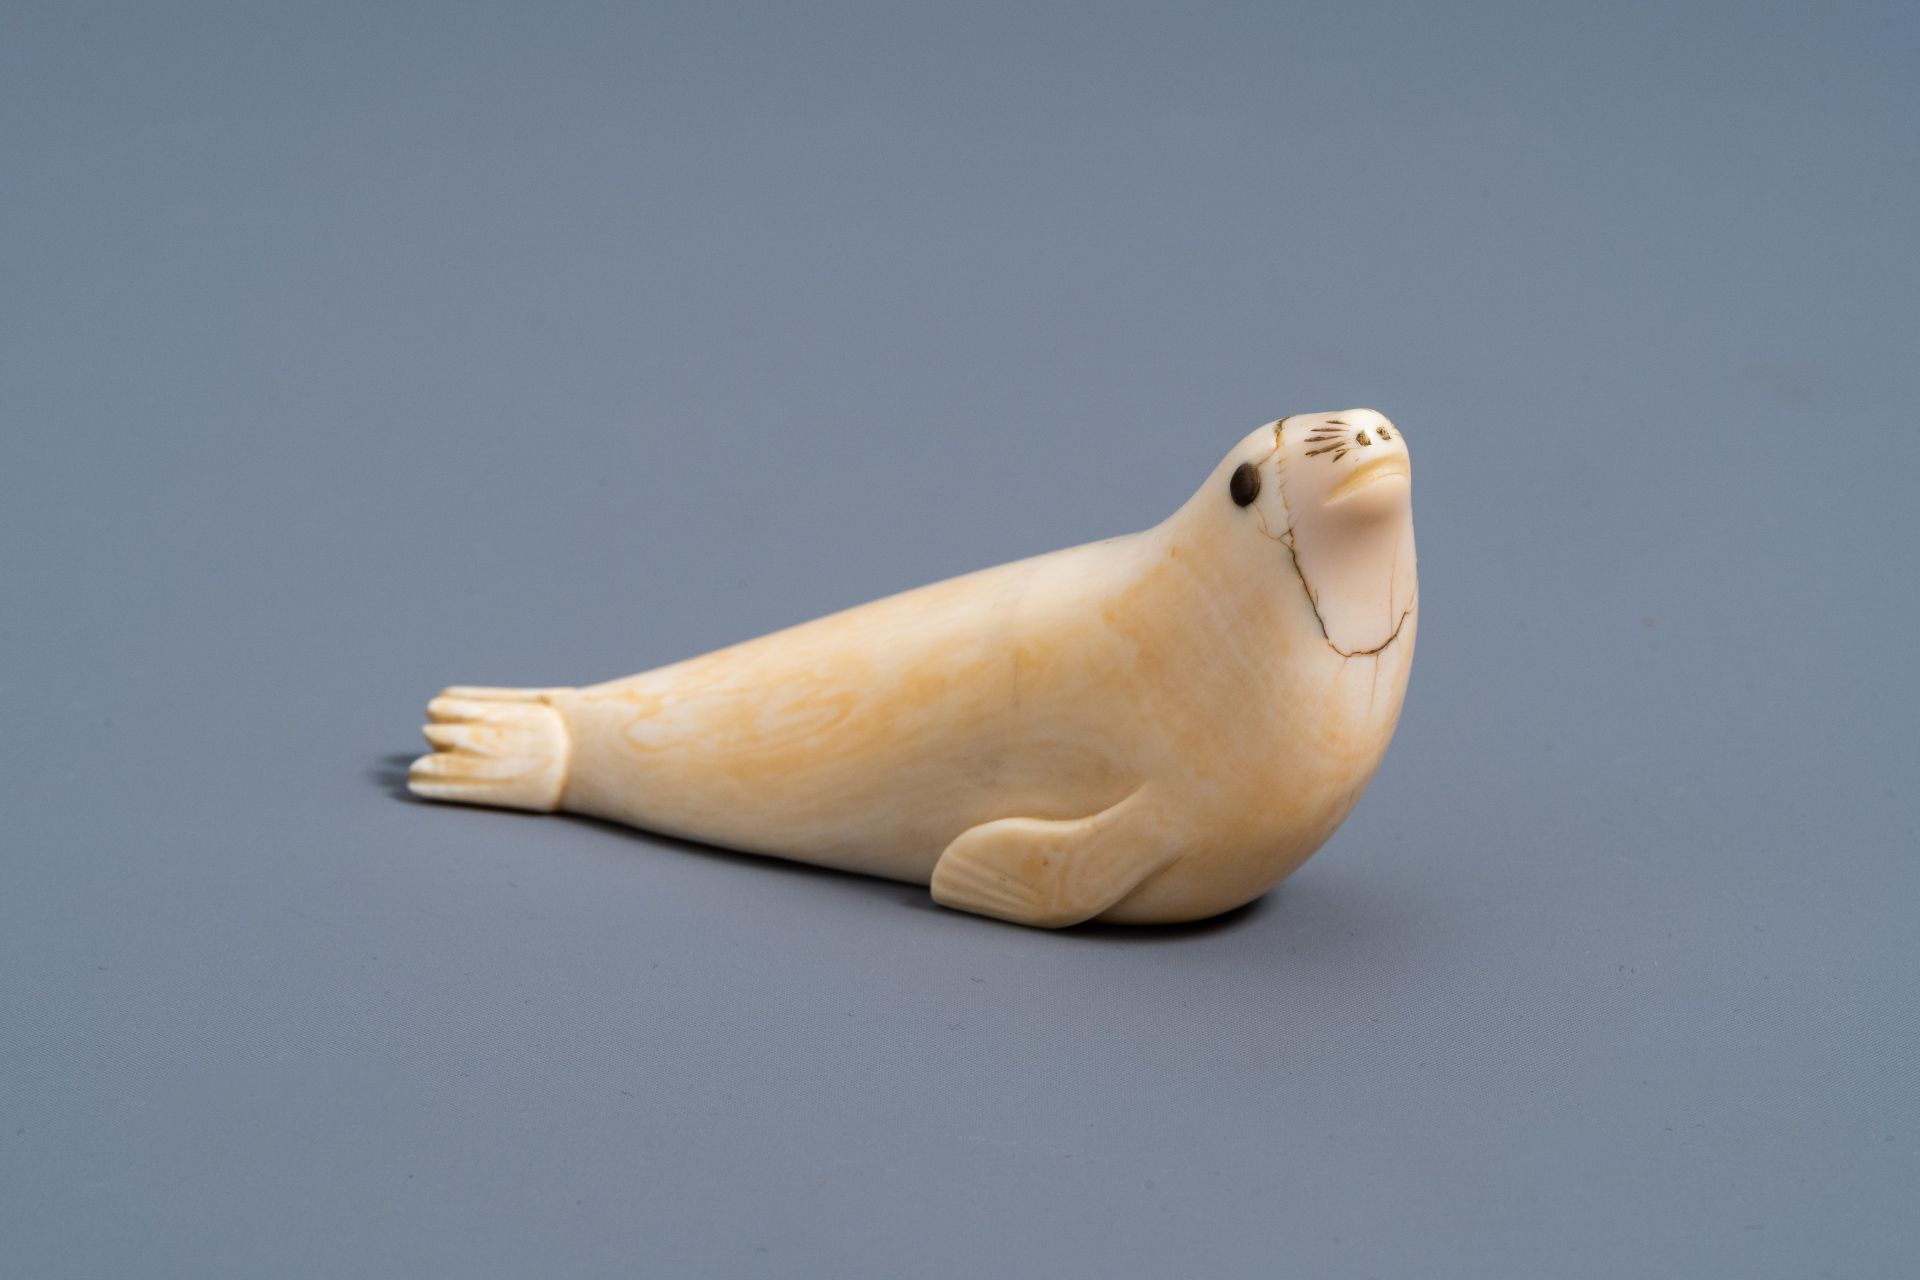 An Inuit carved whale ivory figure of a seal, Canada or Alaska, 19th C.